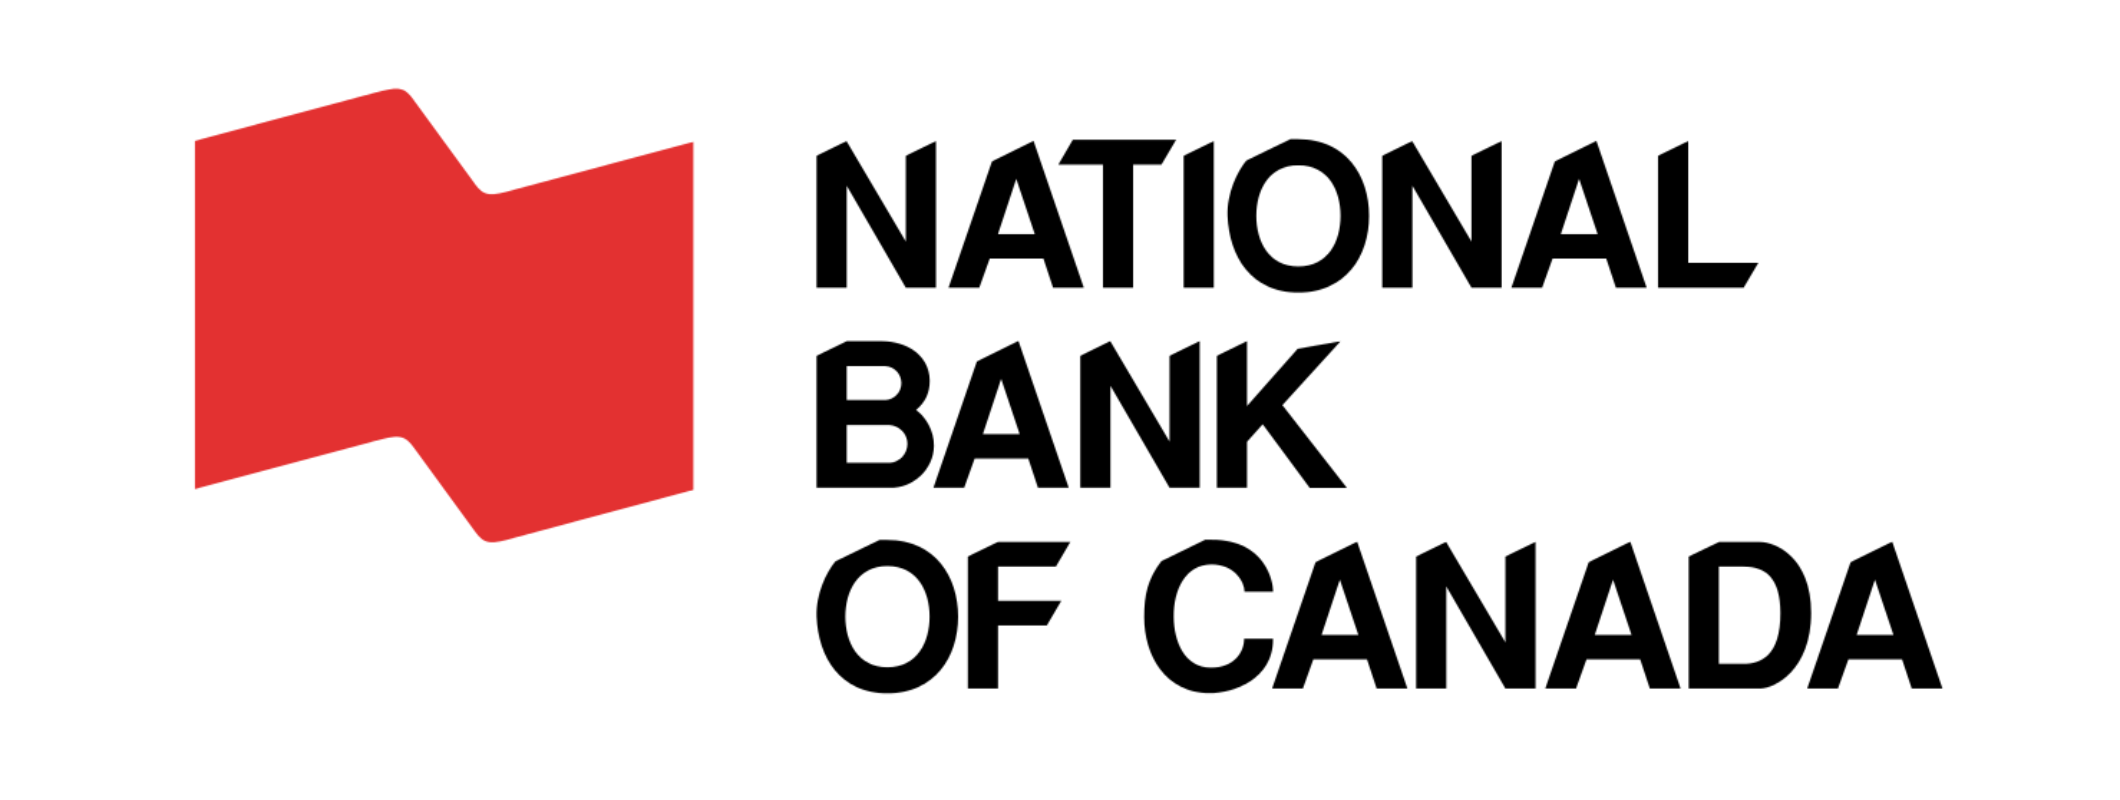 National Bank of Canada-4